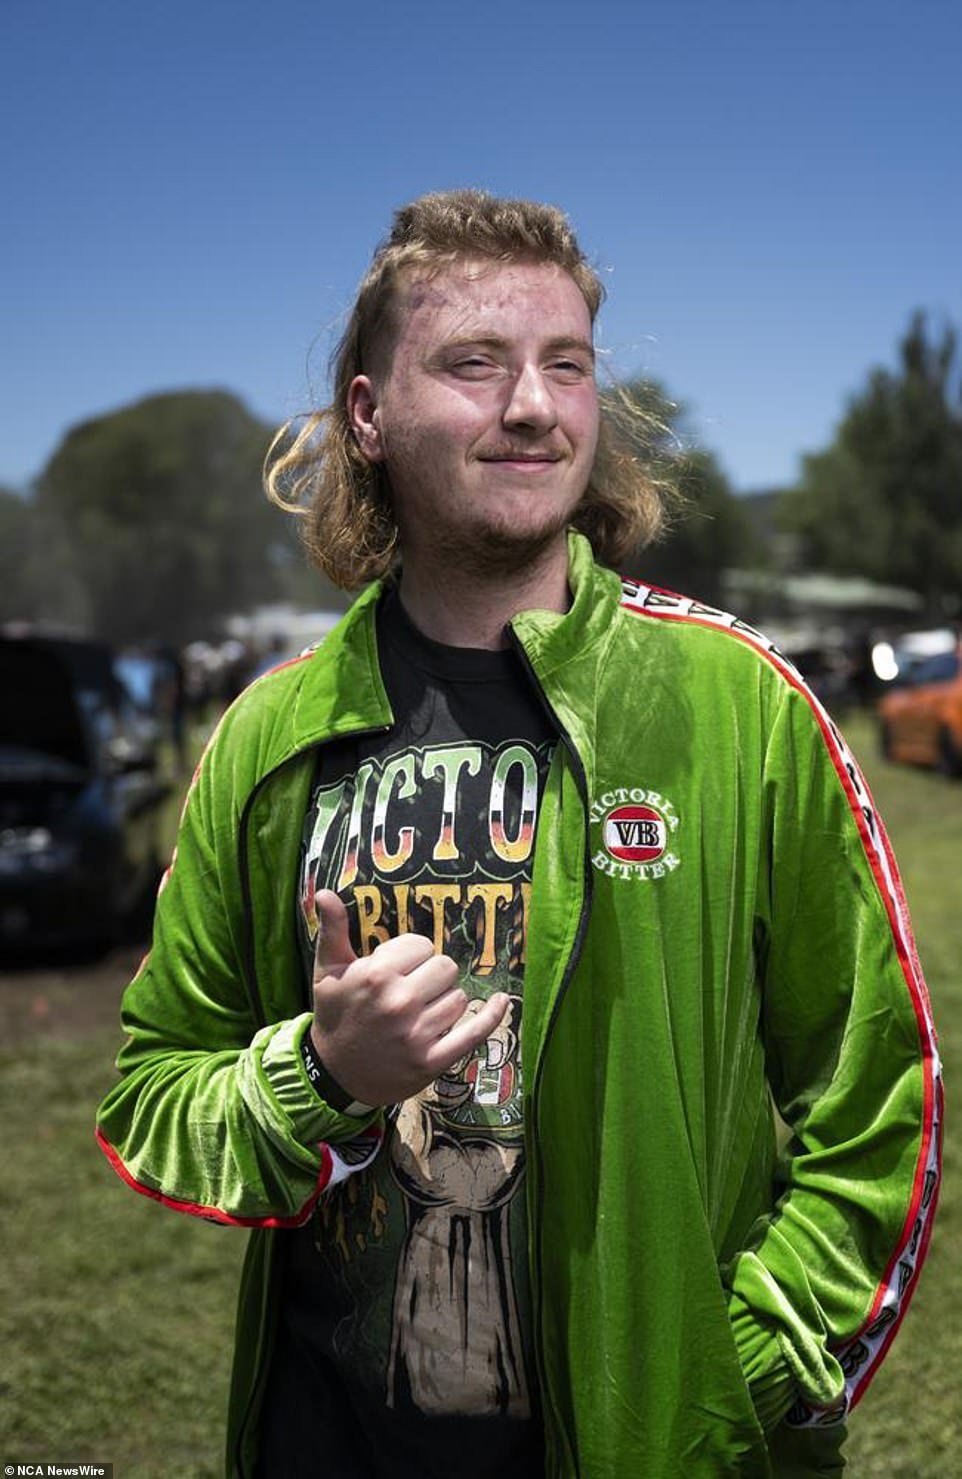 A festival goer shows off his mullet at Summernats in Canberra, where hundreds of thousands of people are expected to attend the event